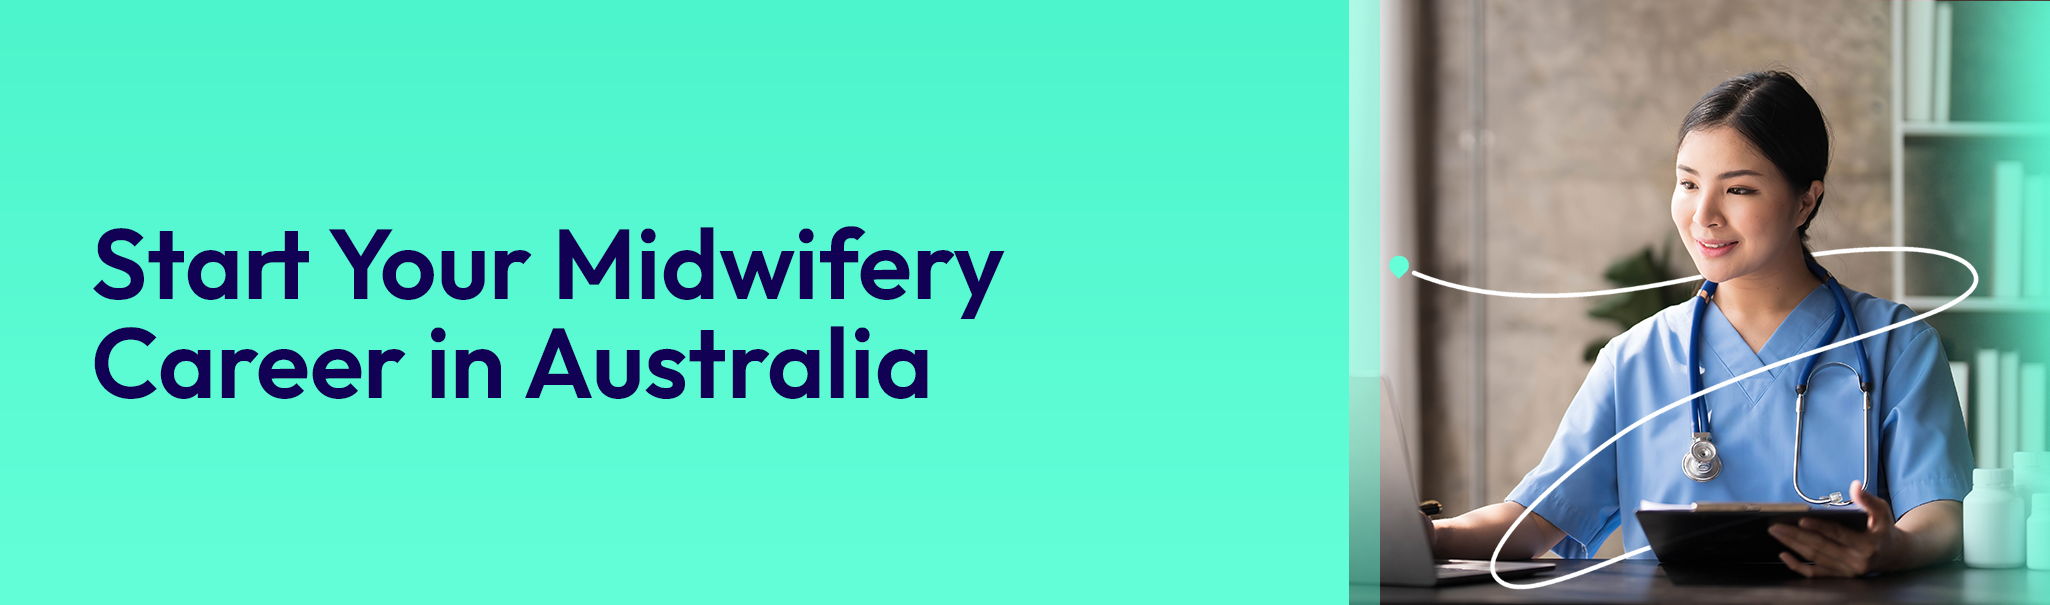 midwife How to Become A Midwife In Australia | Career Pathway